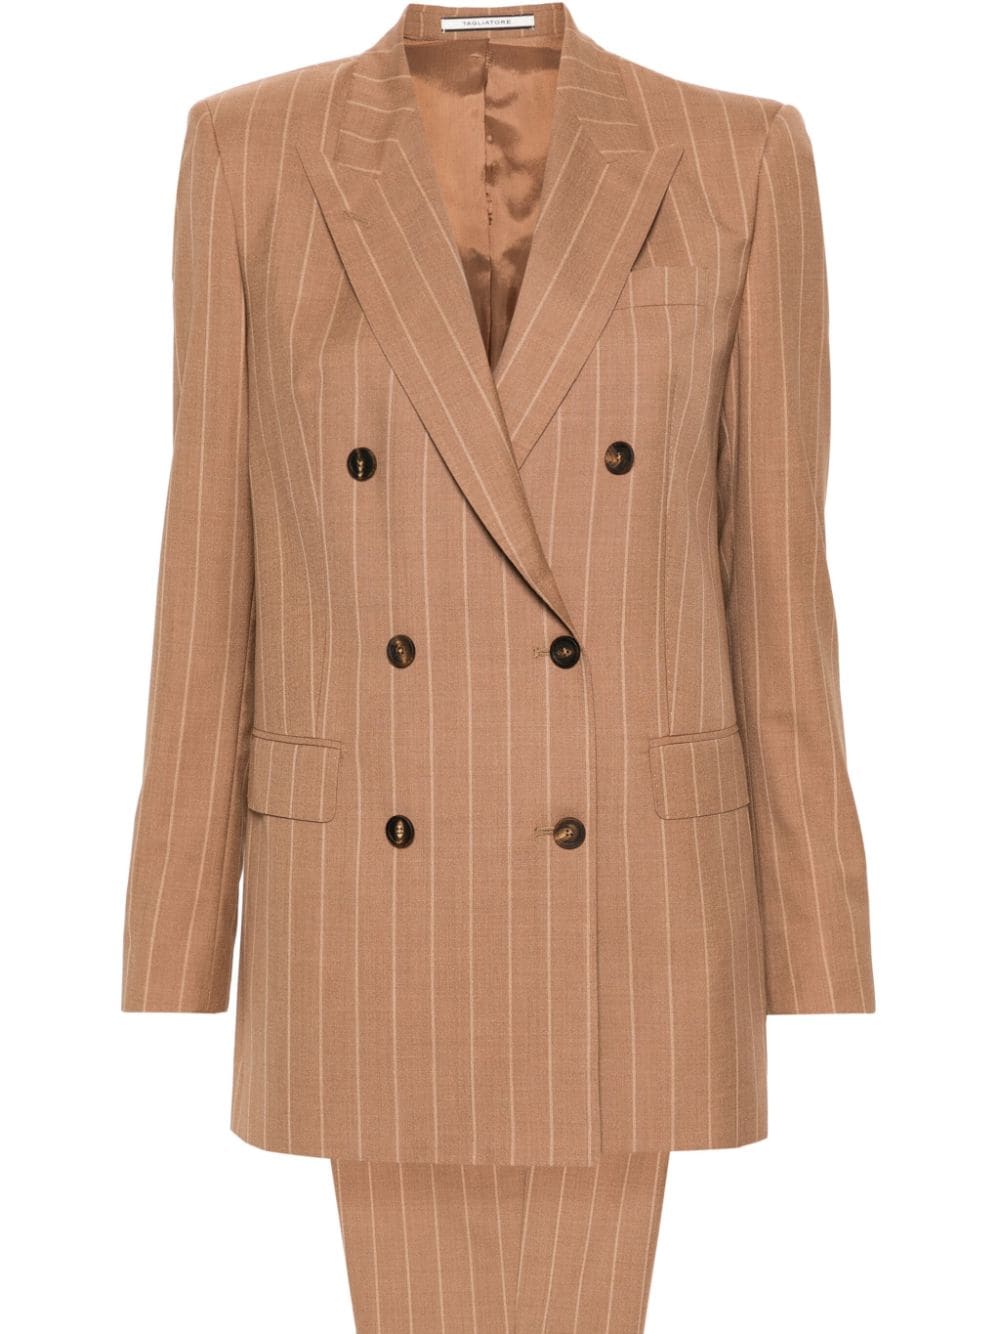 Tagliatore Jasmine striped double-breasted suit - Brown